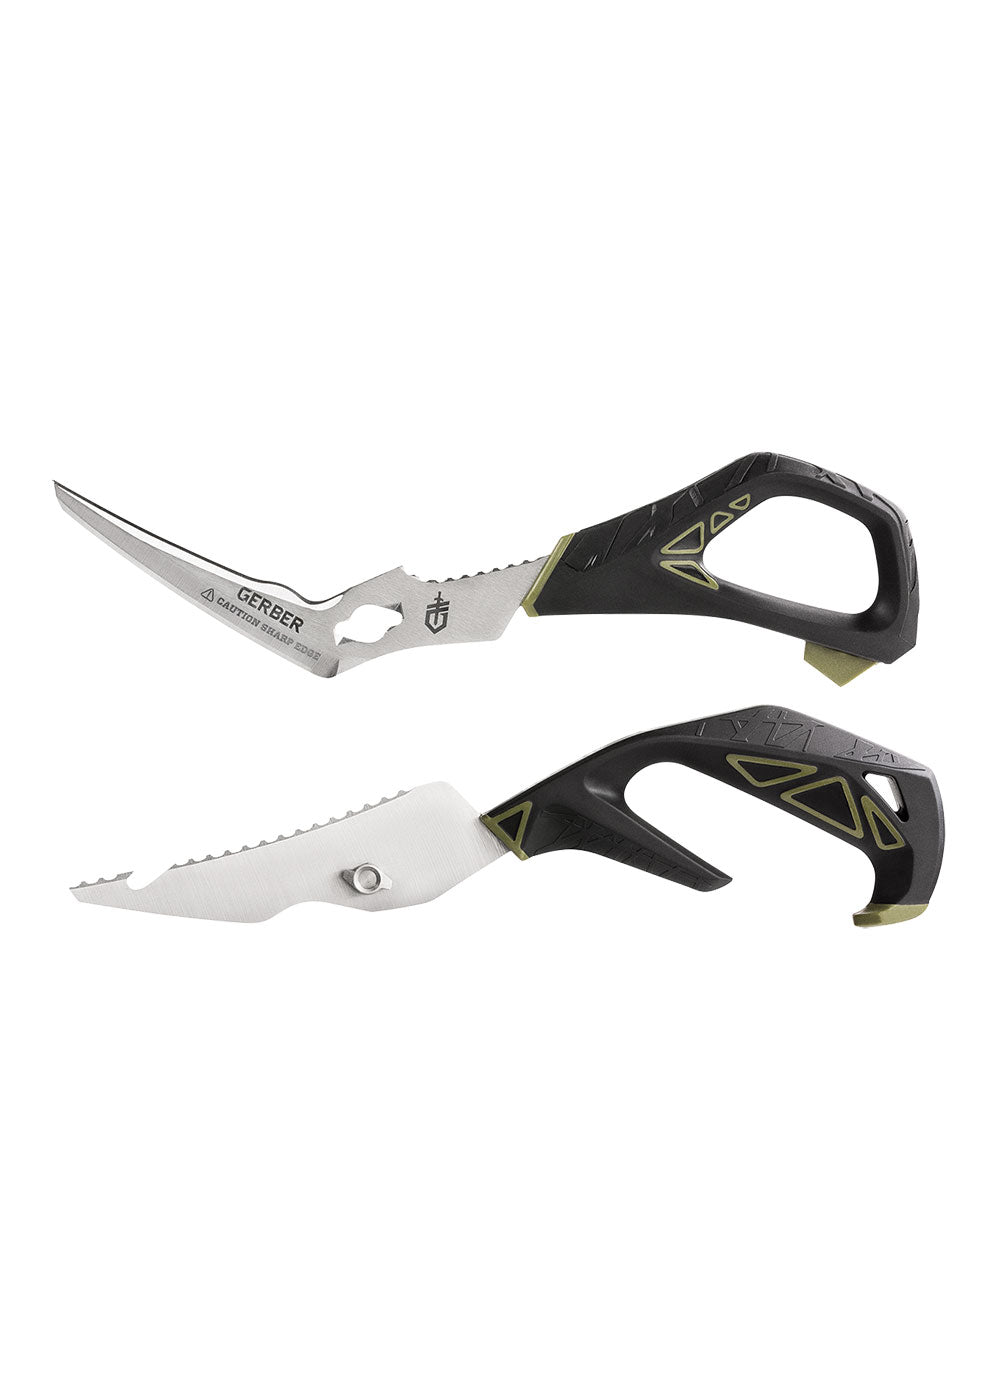 Gerber Processor Take A Part Shears - Adreno - Ocean Outfitters